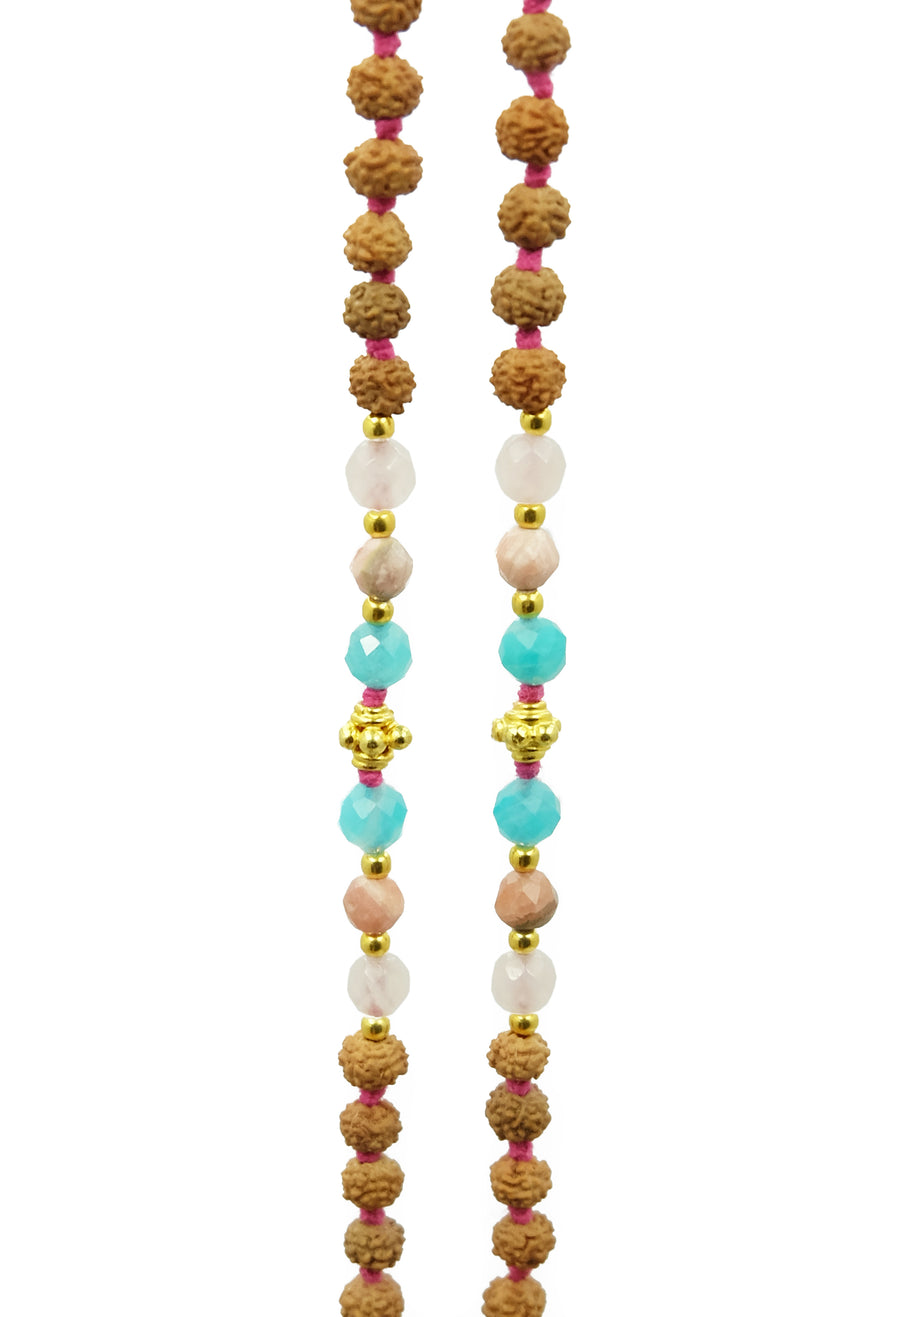 Angel's Embrace necklace made from rose quartz, amazonite, rhodochrosite and 22k gold accentsAngel's Embrace necklace made from rose quartz, amazonite, rhodochrosite and 22k gold accents